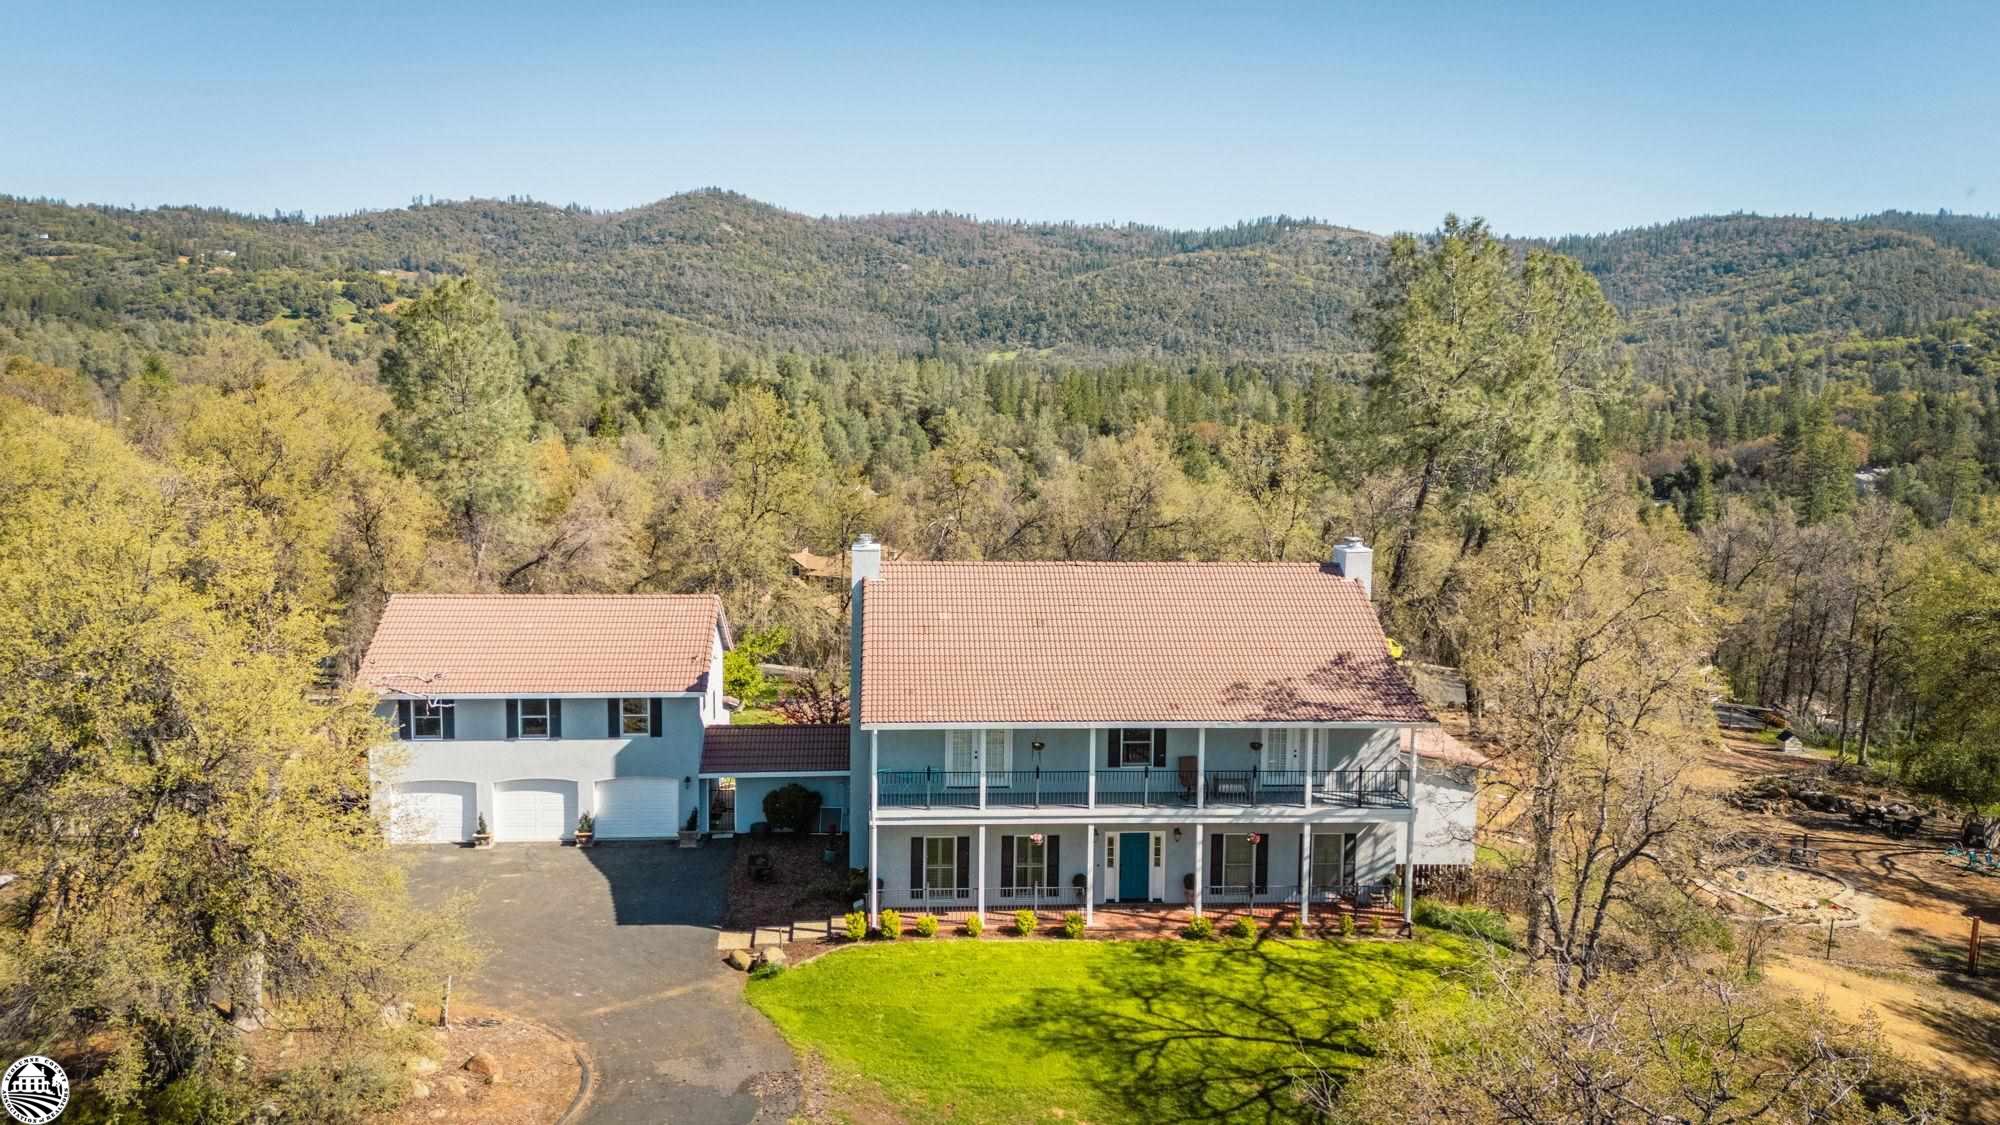 Photo of 21819 Lyons Bald Mountain Rd in Sonora, CA